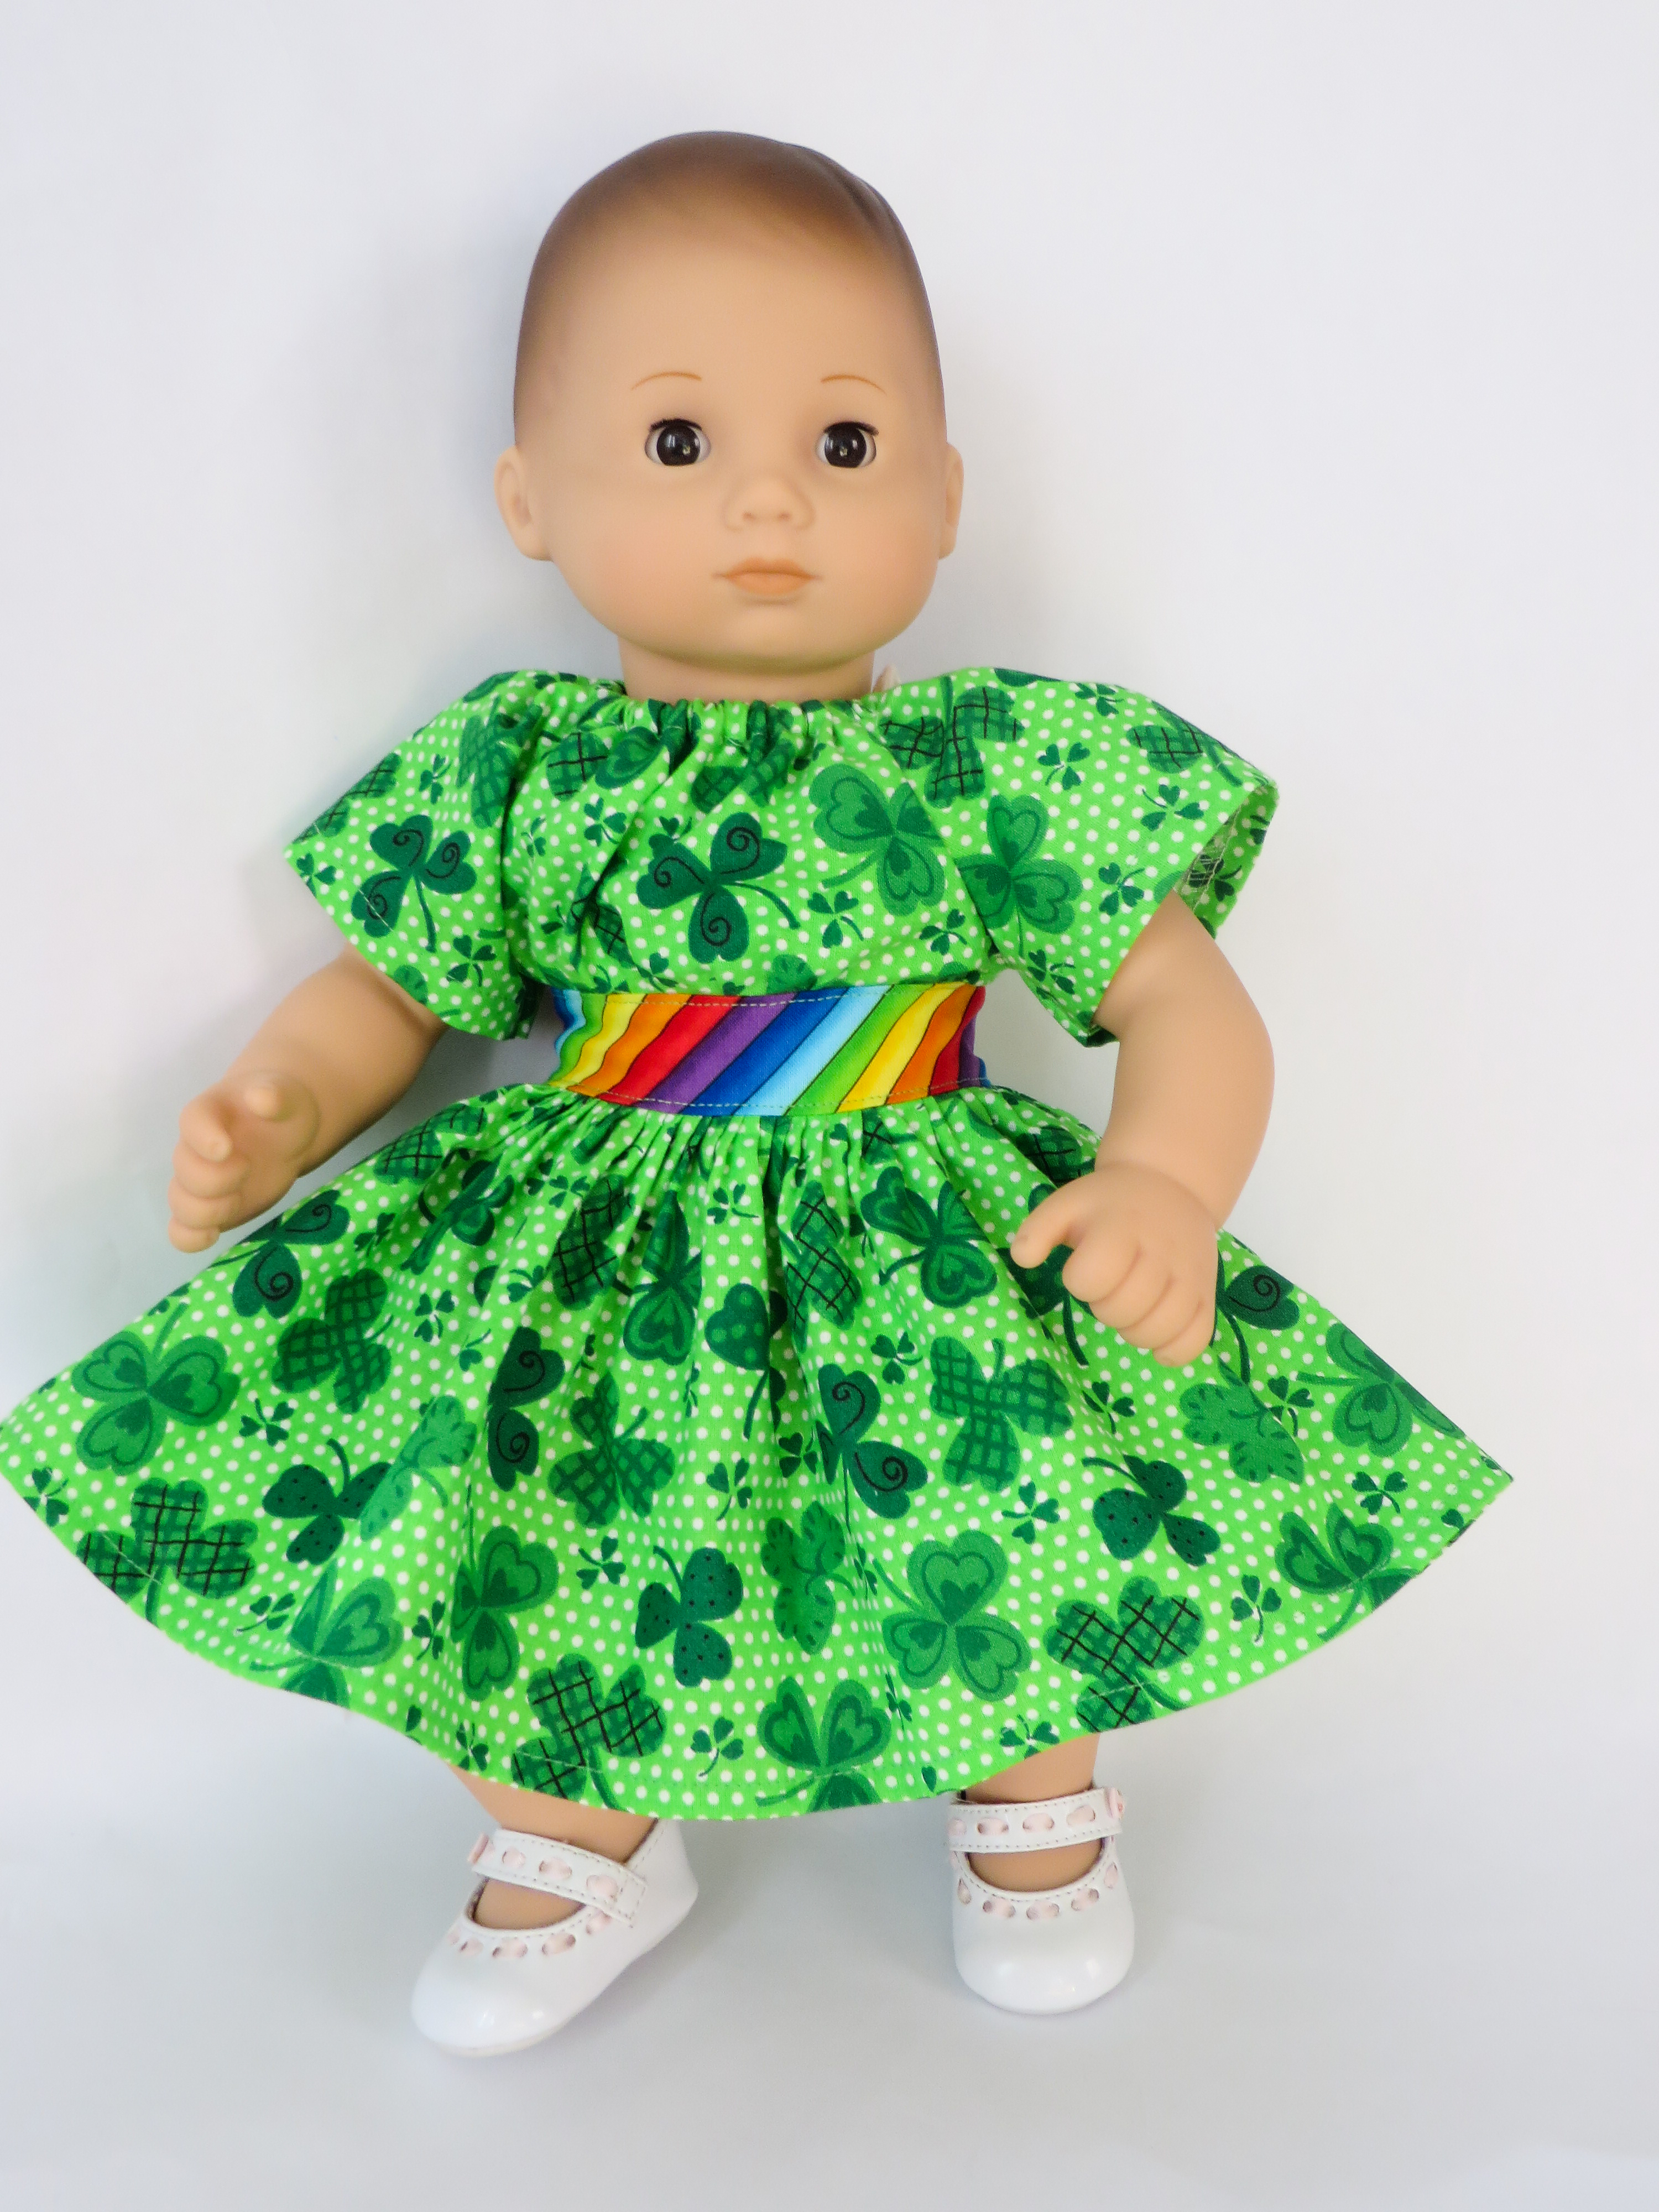 Make your own diy doll clothes with easy sewing PDF digital sewing patterns by OH Sew Kat.  Make doll clothes for 18 inch dolls, Wellie wishers, bitty Baby, a Girl for all time, and Animators.  Easy sewing patterns with full photo tutorials.  #stpatricksdaycraft